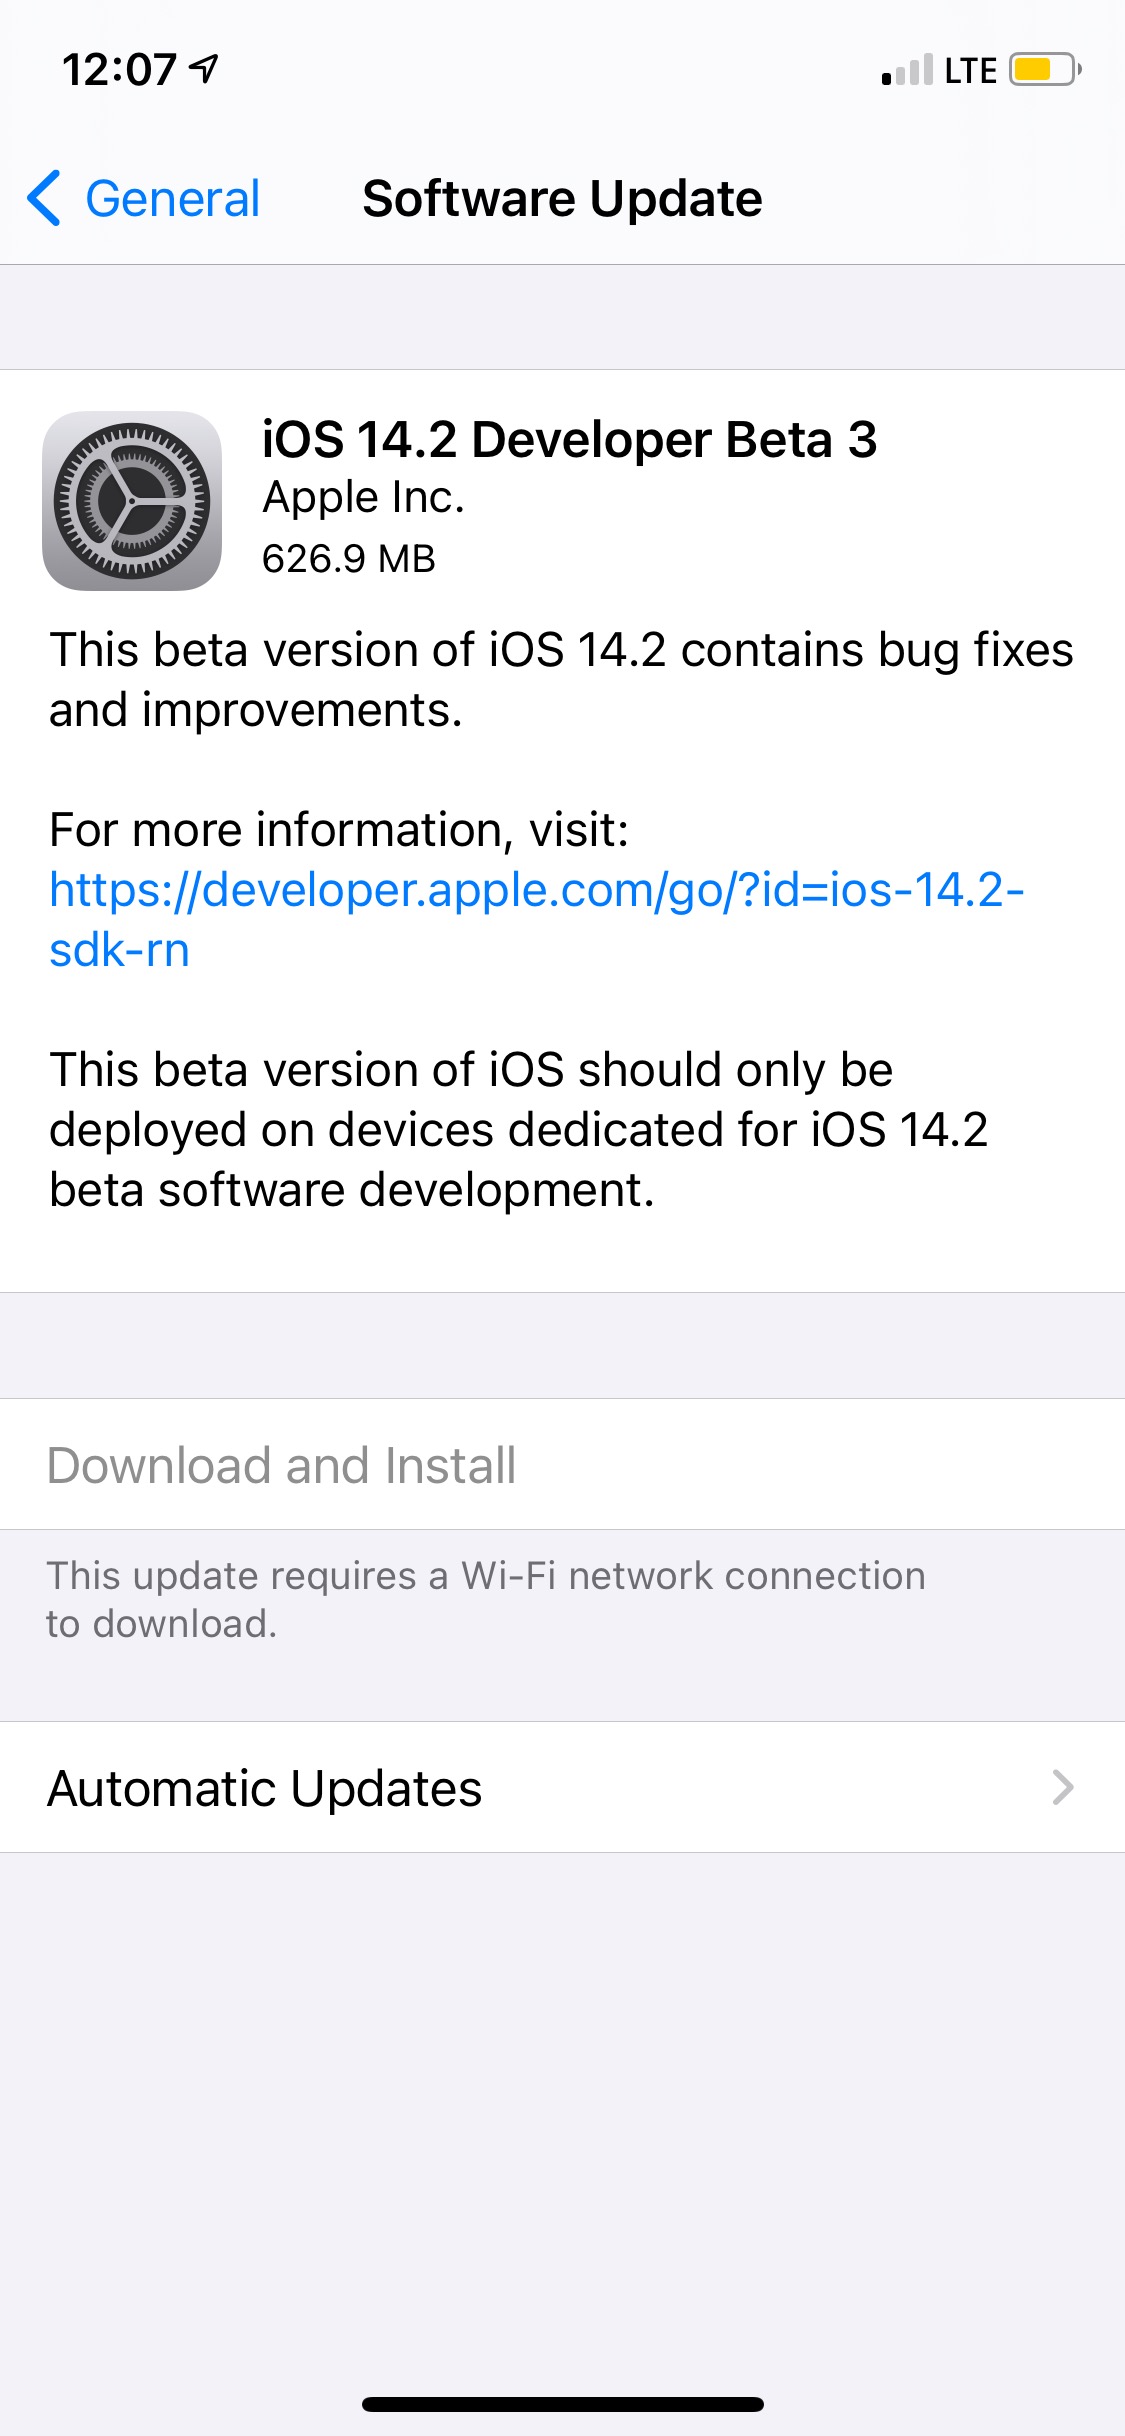 Apple Releases iOS 14.2 Beta 3 and iPadOS 14.2 Beta 3 [Download]